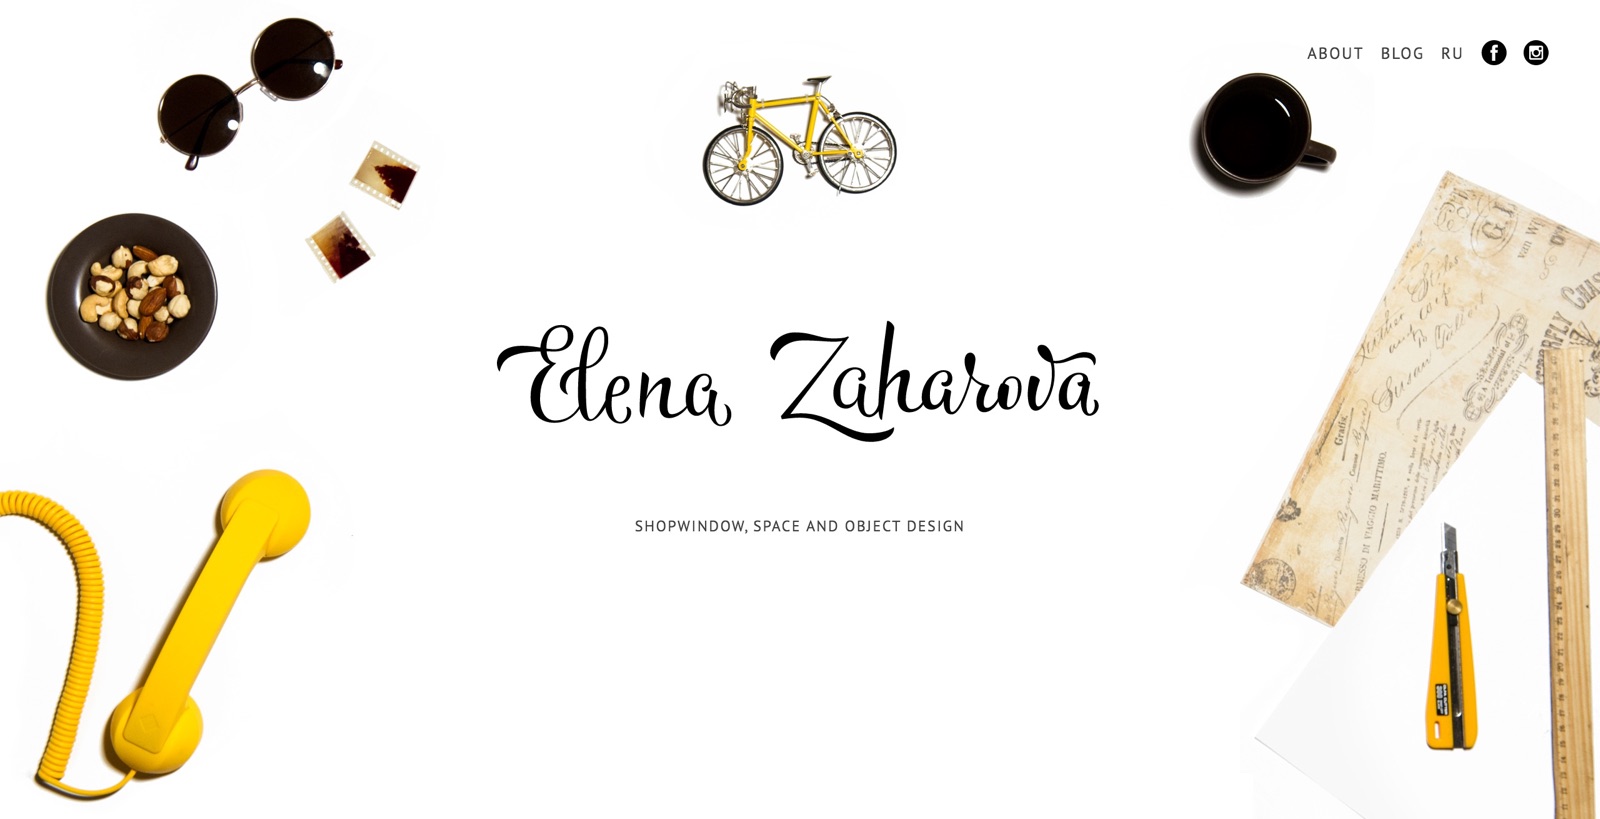 Elena Zaharova’s table with sunglasses, toy bicycle, tea cup, photo negatives and sketches